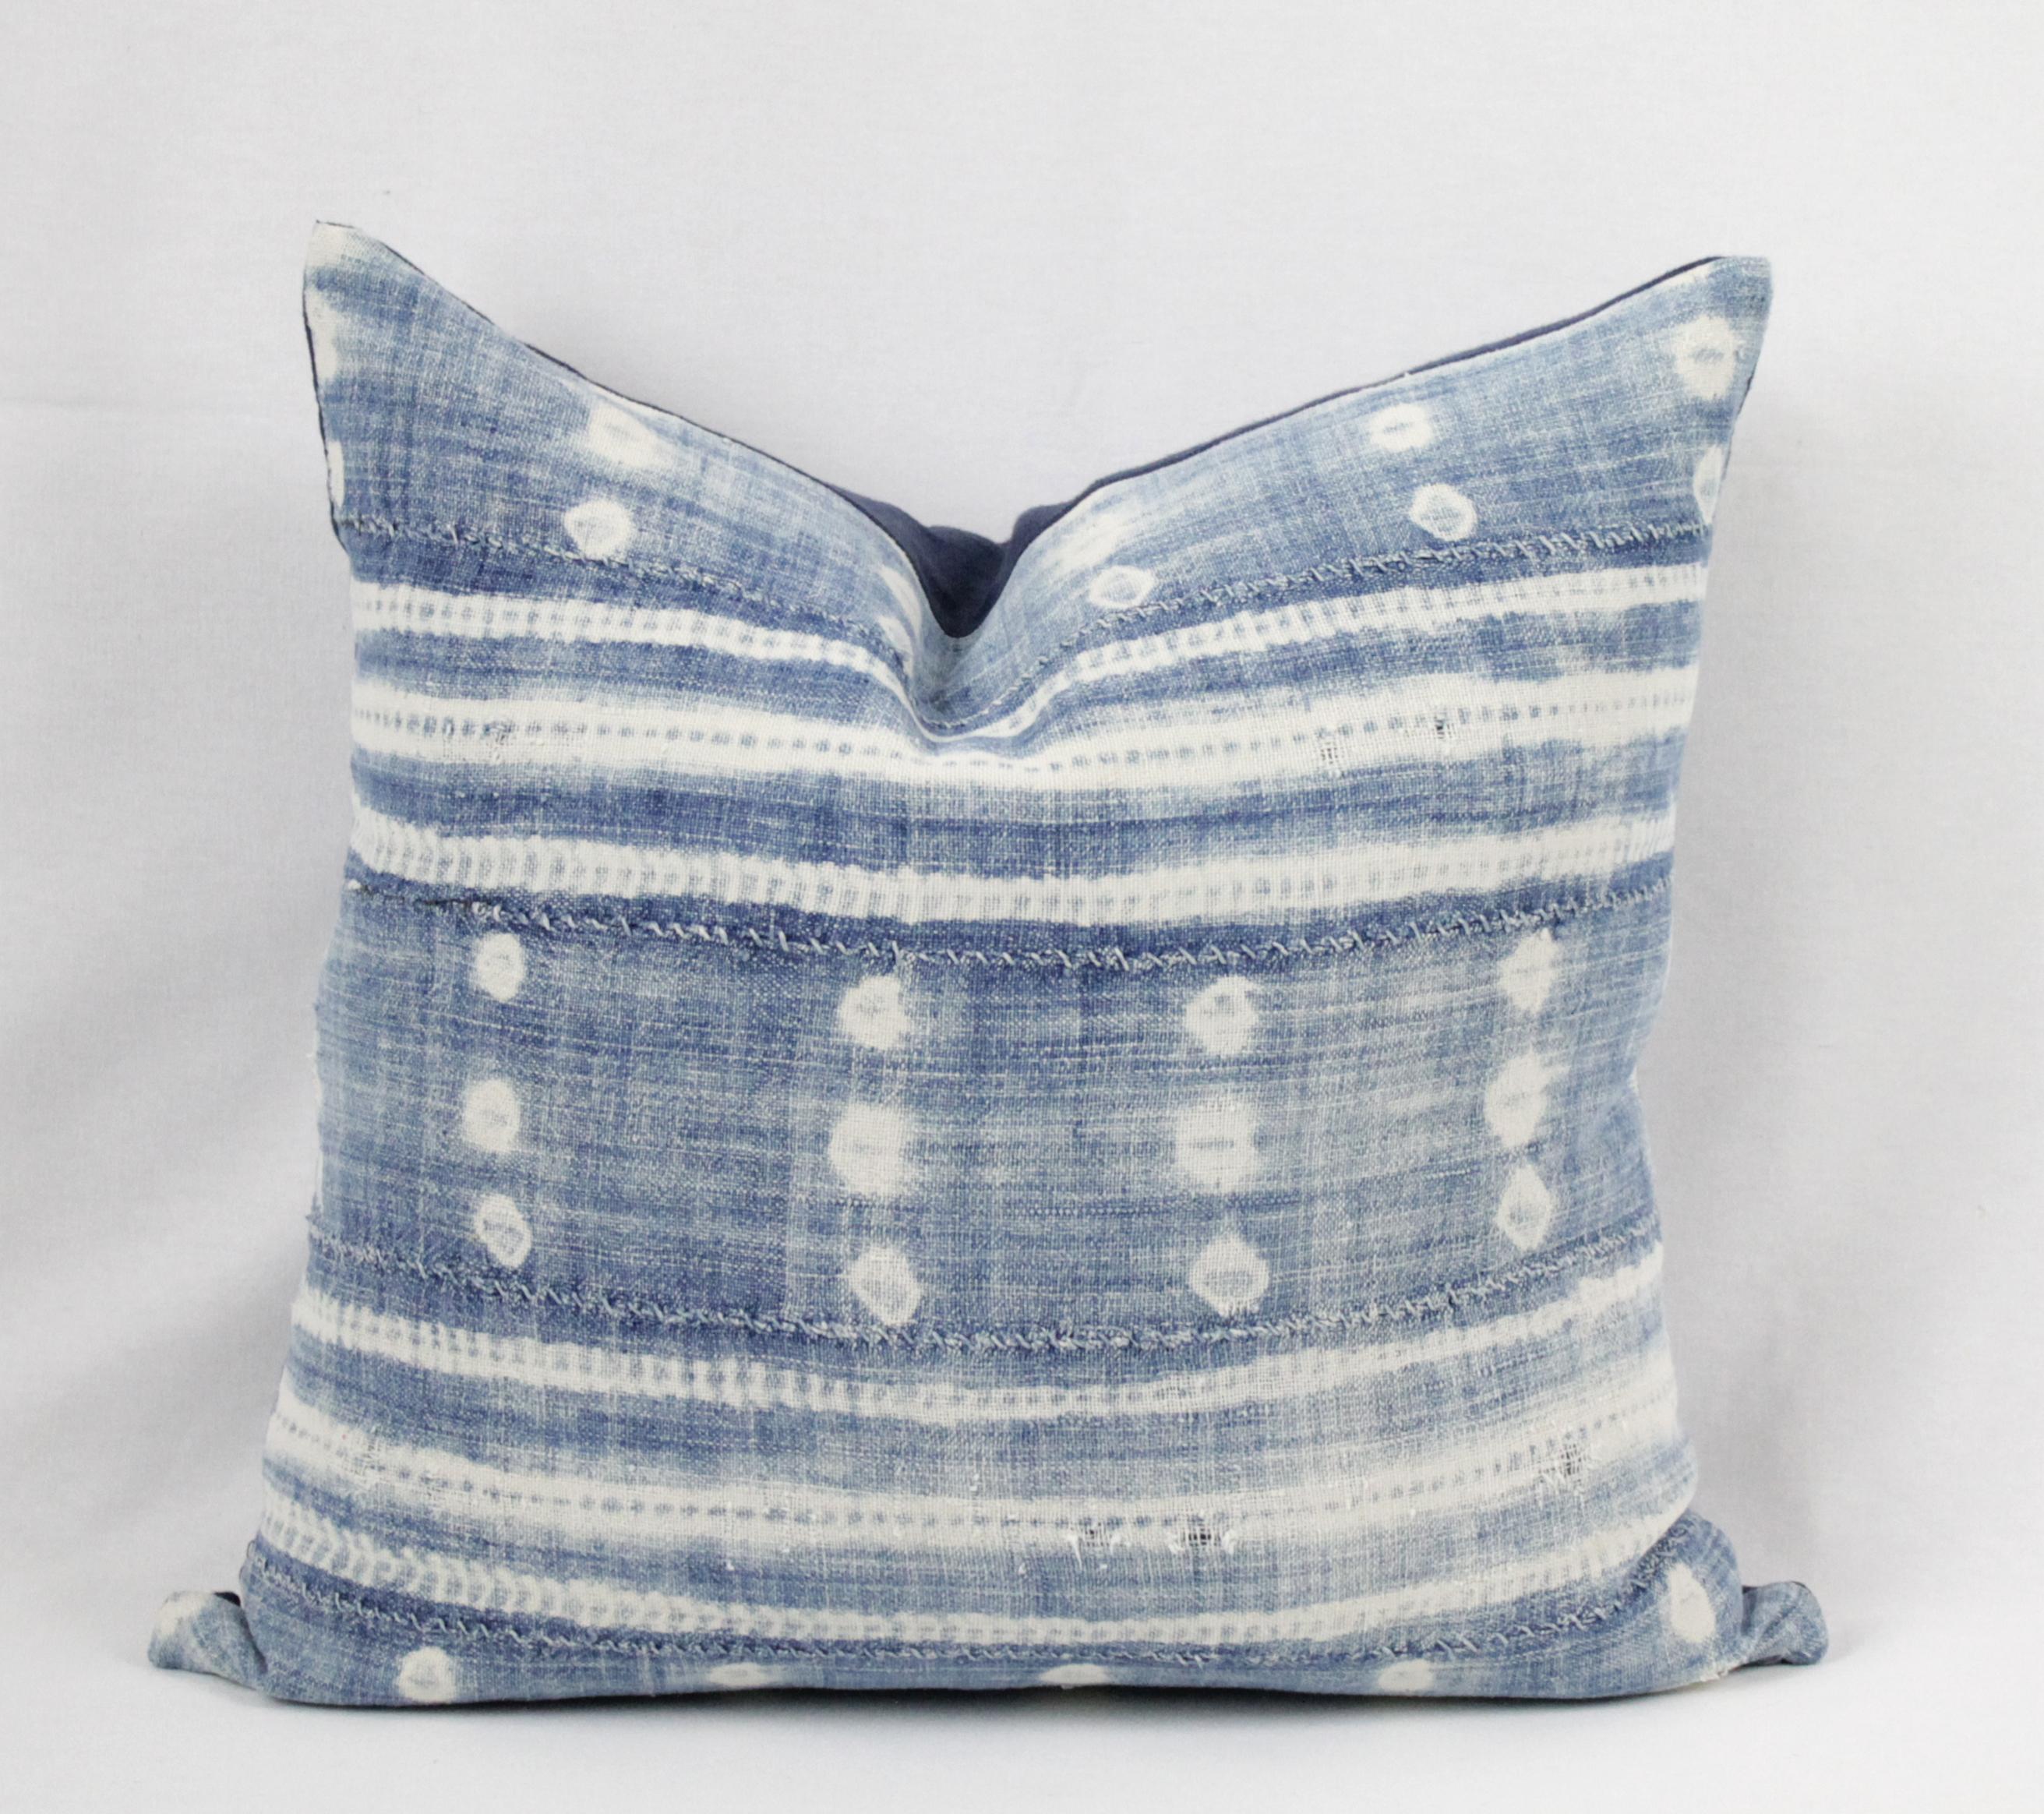 Blue and white batik style pillow, with zipper closure. Pillow has horizontal exposed seams with some distressing and fading. Pillow is lined with an indigo blue linen. Back is in an indigo blue linen and finished with overlocked edges. Main colors